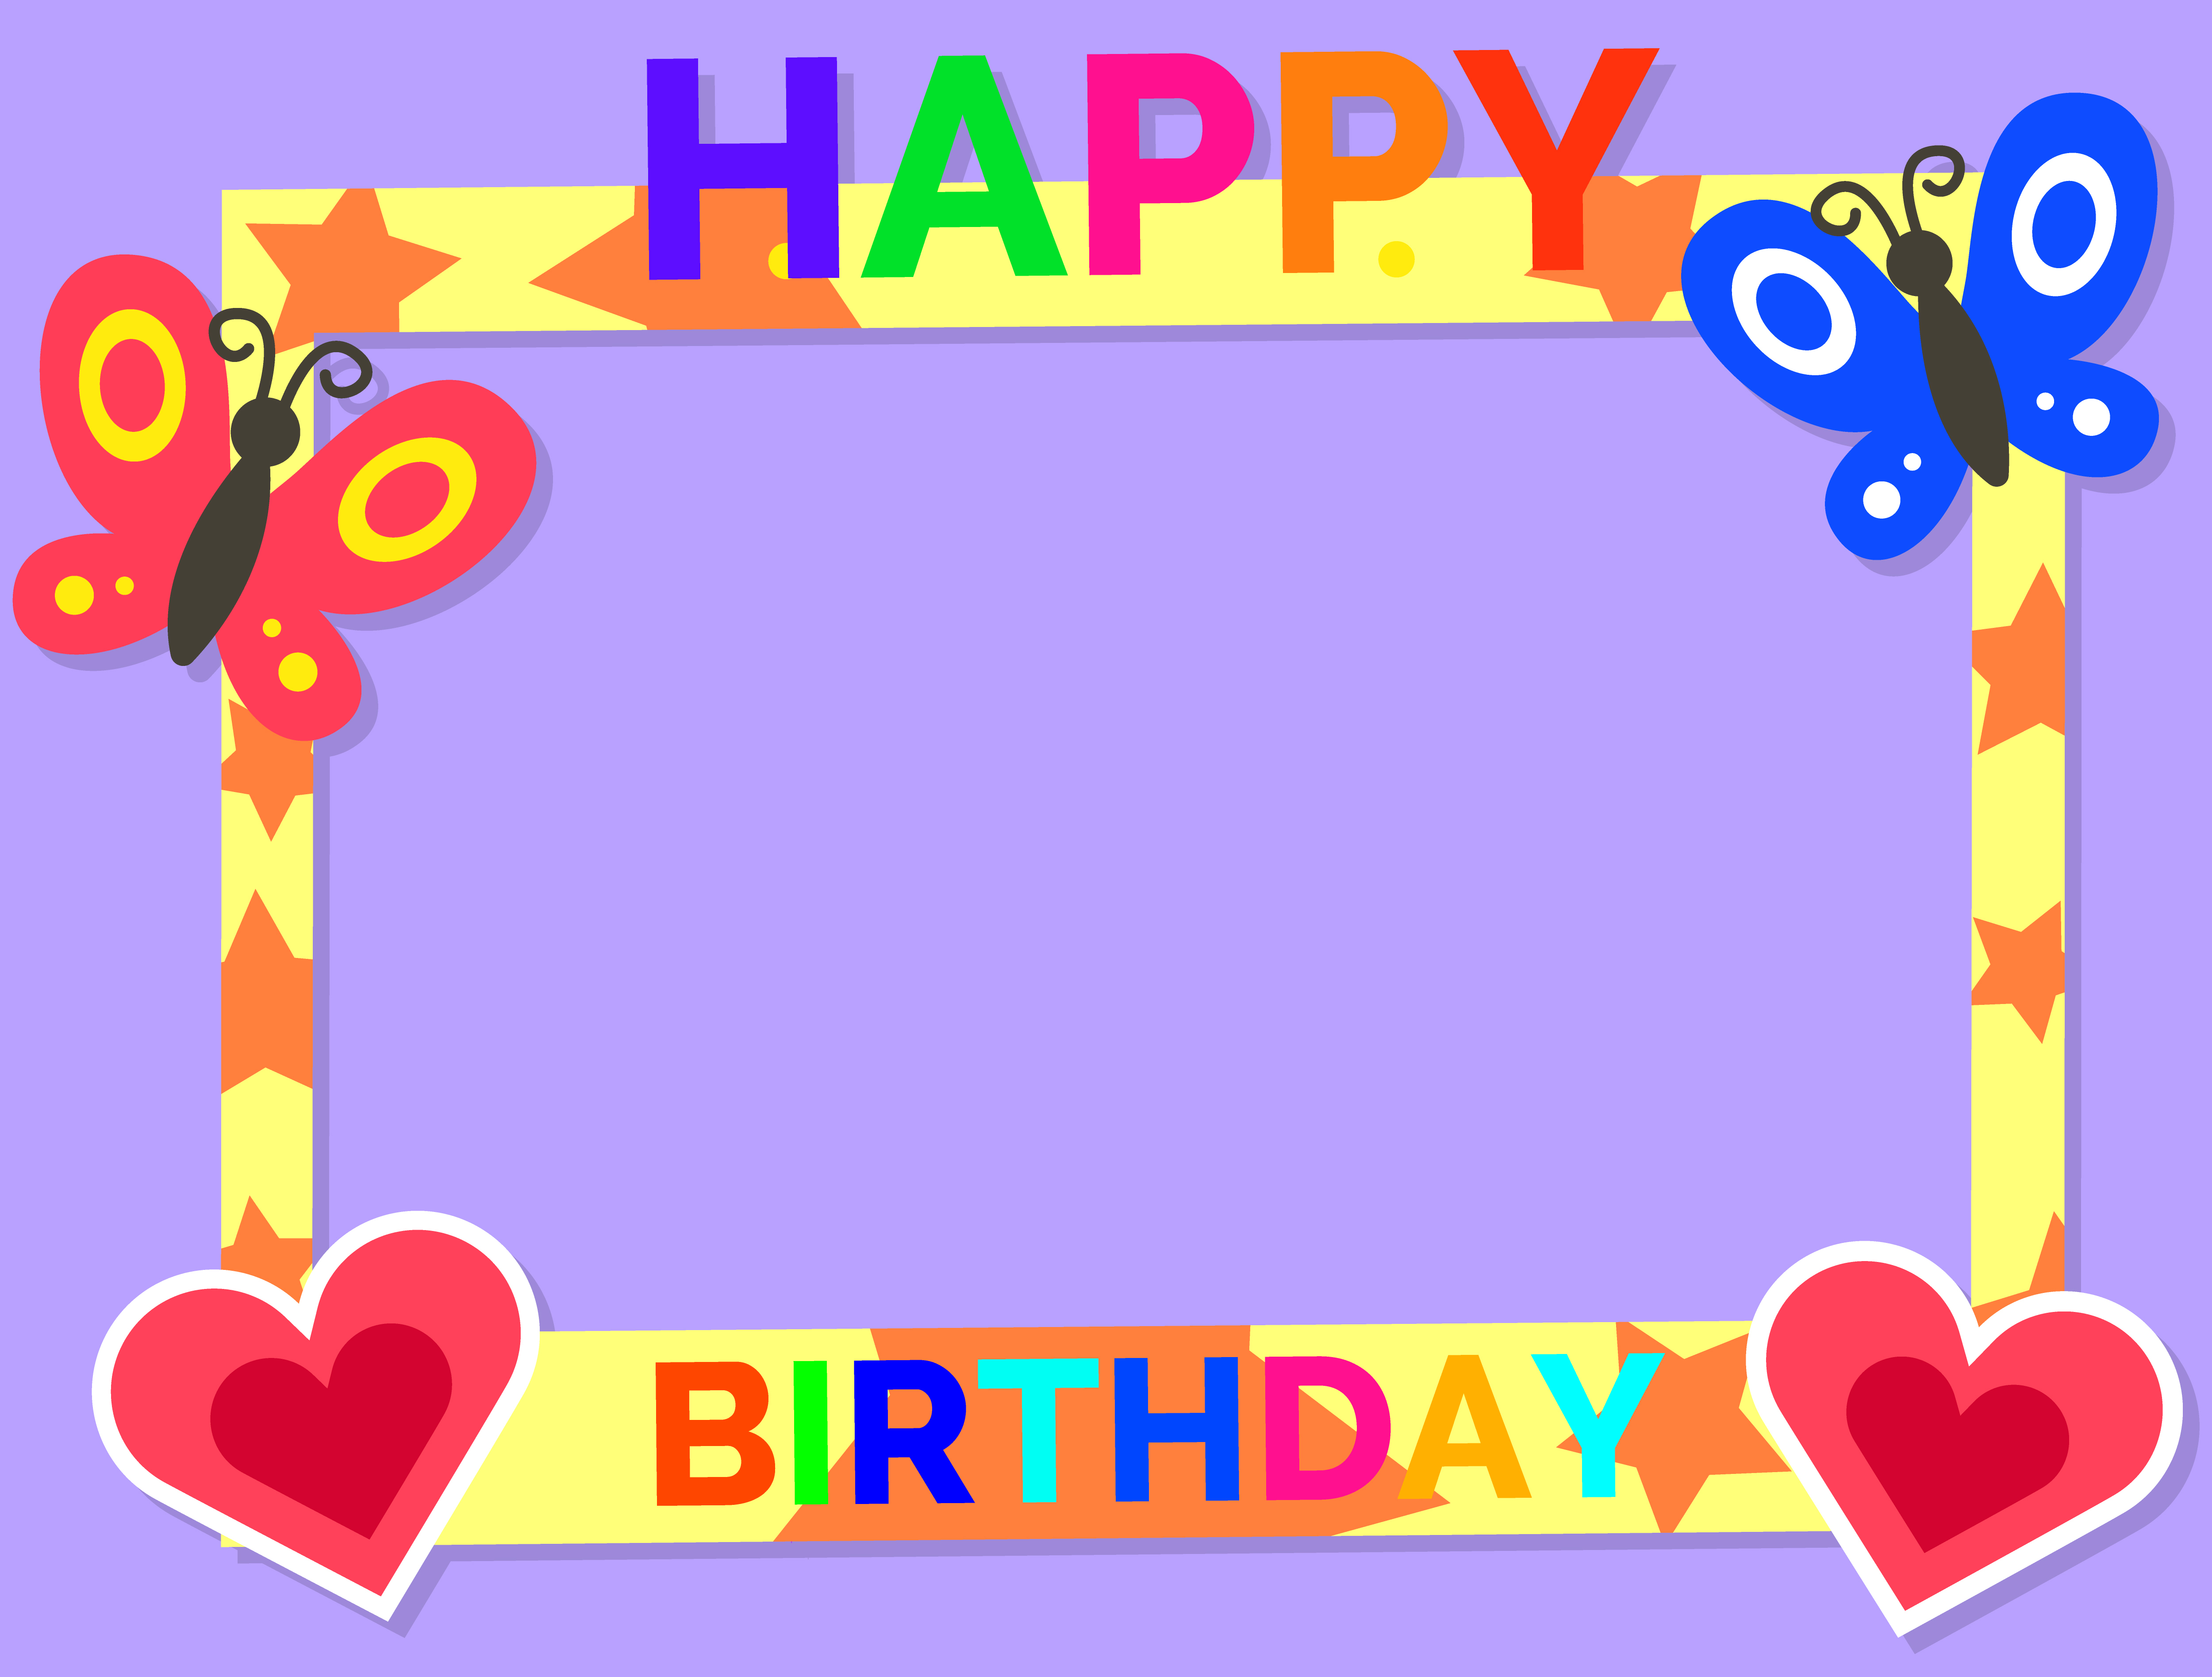 Happy Birthday colorful photo frame template with little hearts and butterflies on lavender background. Greetings and photozone accessories and festive decoration for kids party vector illustration. Happy Birthday Cute Colorful Photo Frame Vector